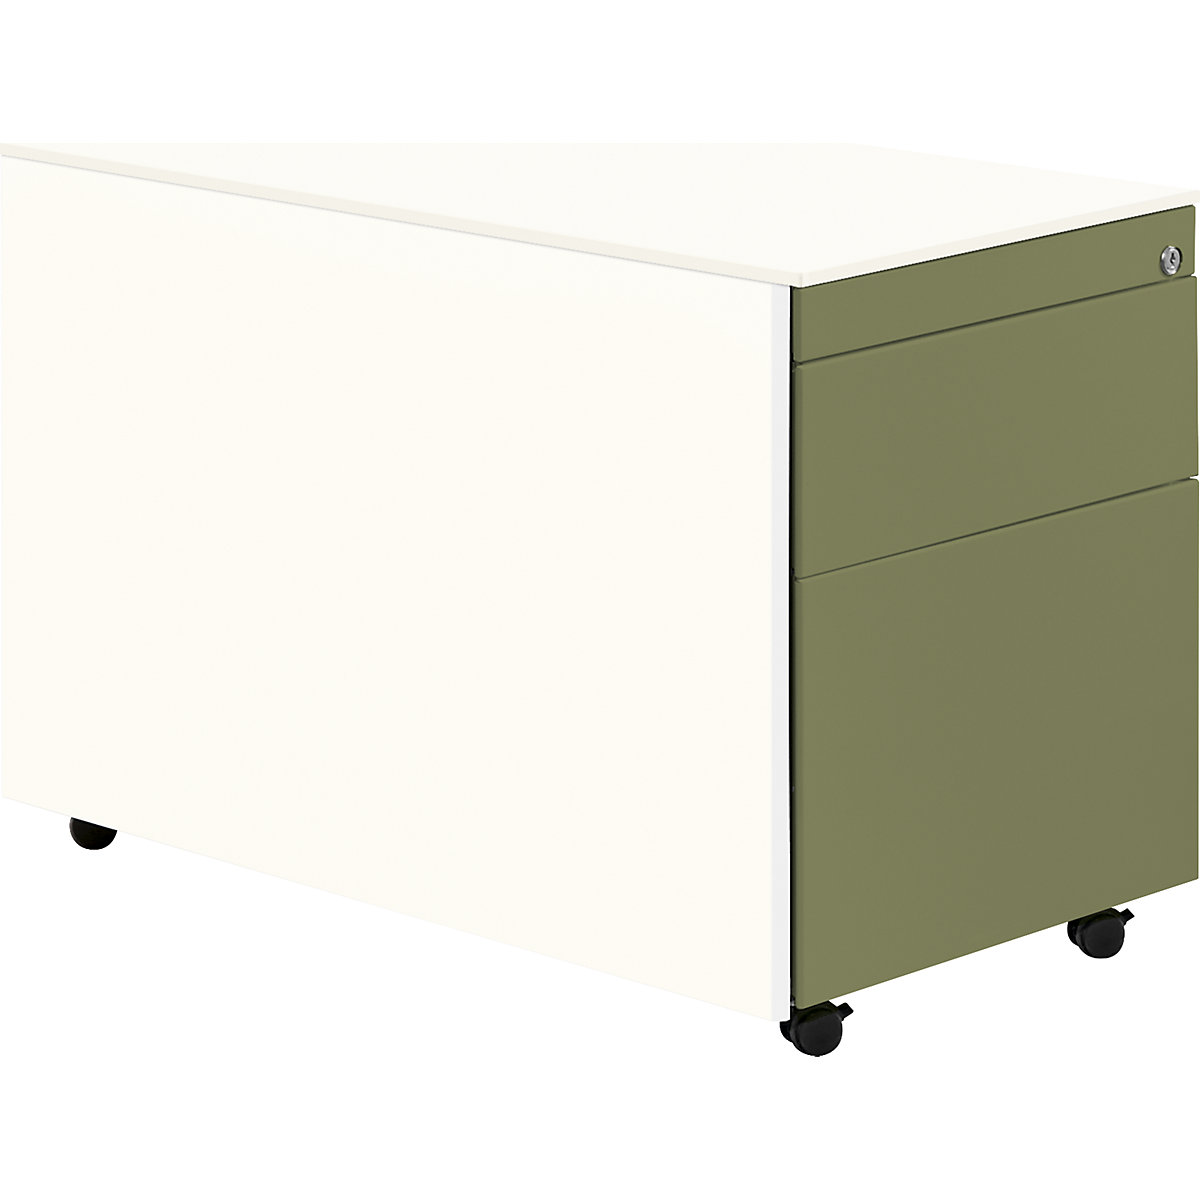 Drawer pedestal with castors – mauser, HxD 570 x 800 mm, 1 drawer, 1 suspension file drawer, pure white / reed green / pure white-11